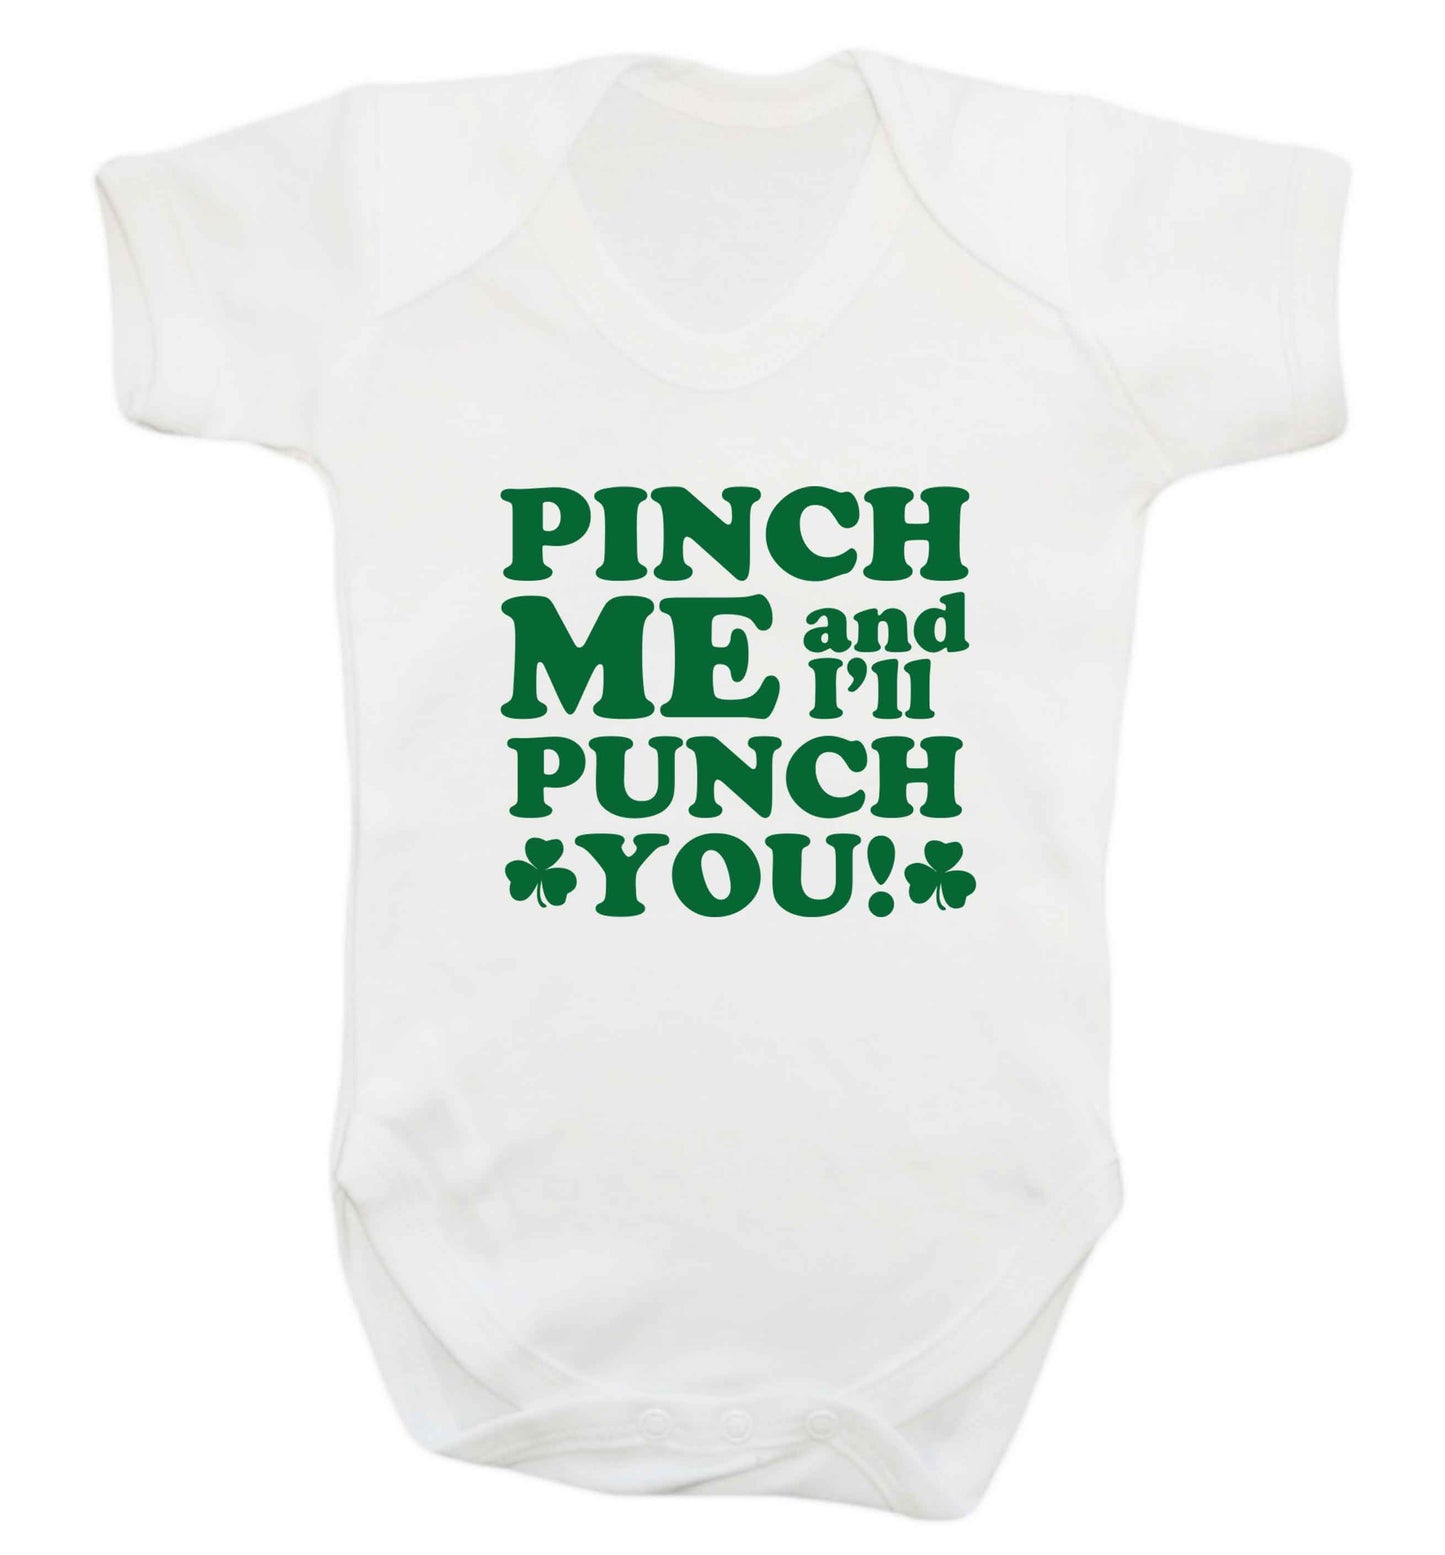 Pinch me and I'll punch you baby vest white 18-24 months